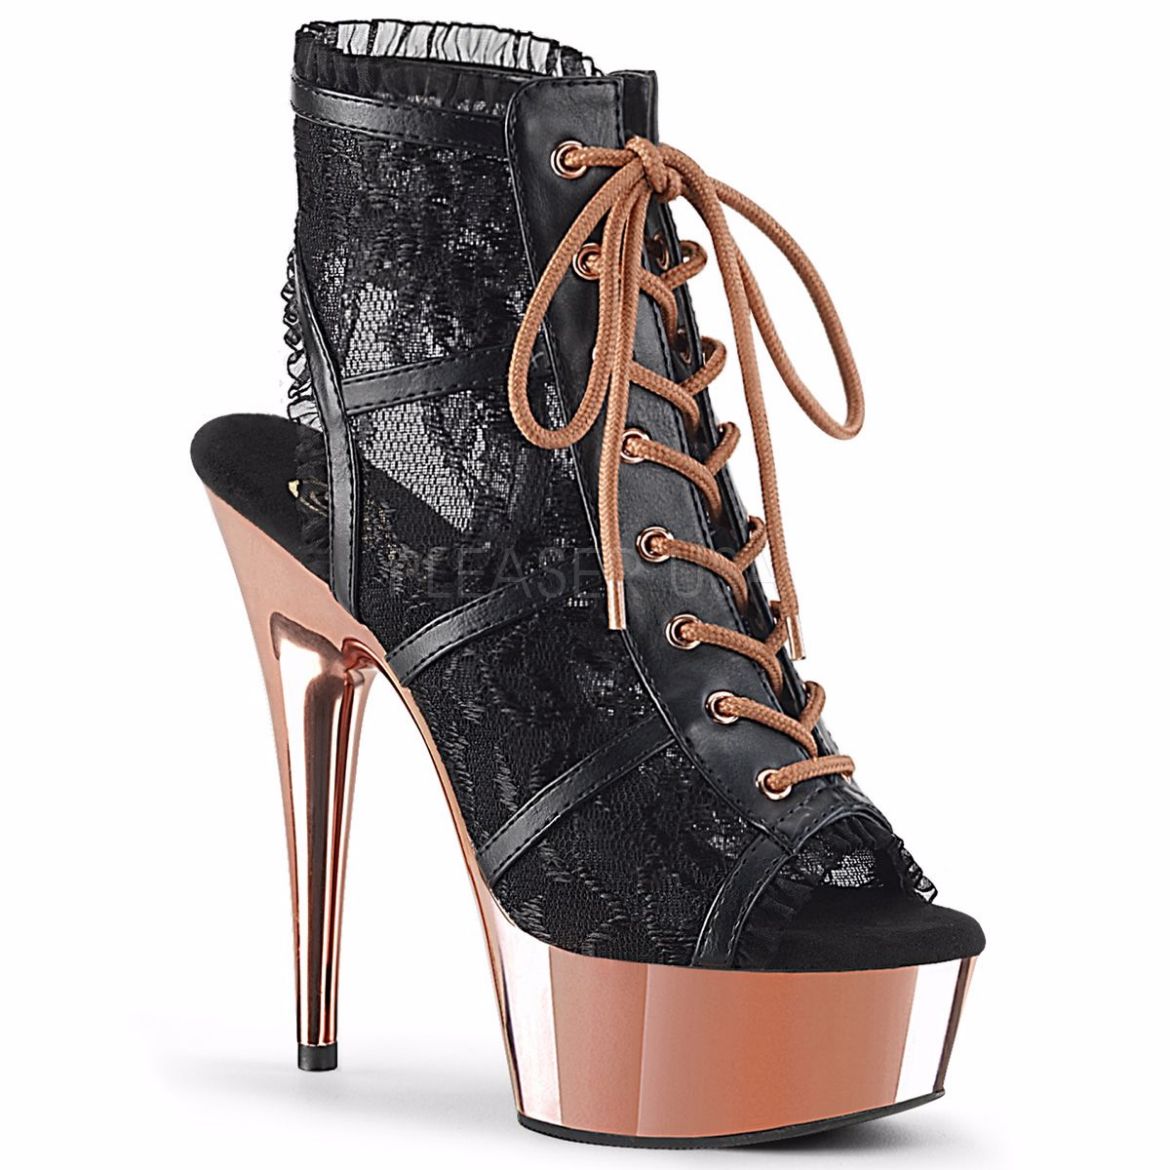 Product image of Pleaser DELIGHT-696LC Black Faux Leather-Lace/Rose Gold Chrome 6 inch (15.2 cm) Heel 1 3/4 inch (4.5 cm) Platform Open Toe/Heel Lace Overlay Bootie